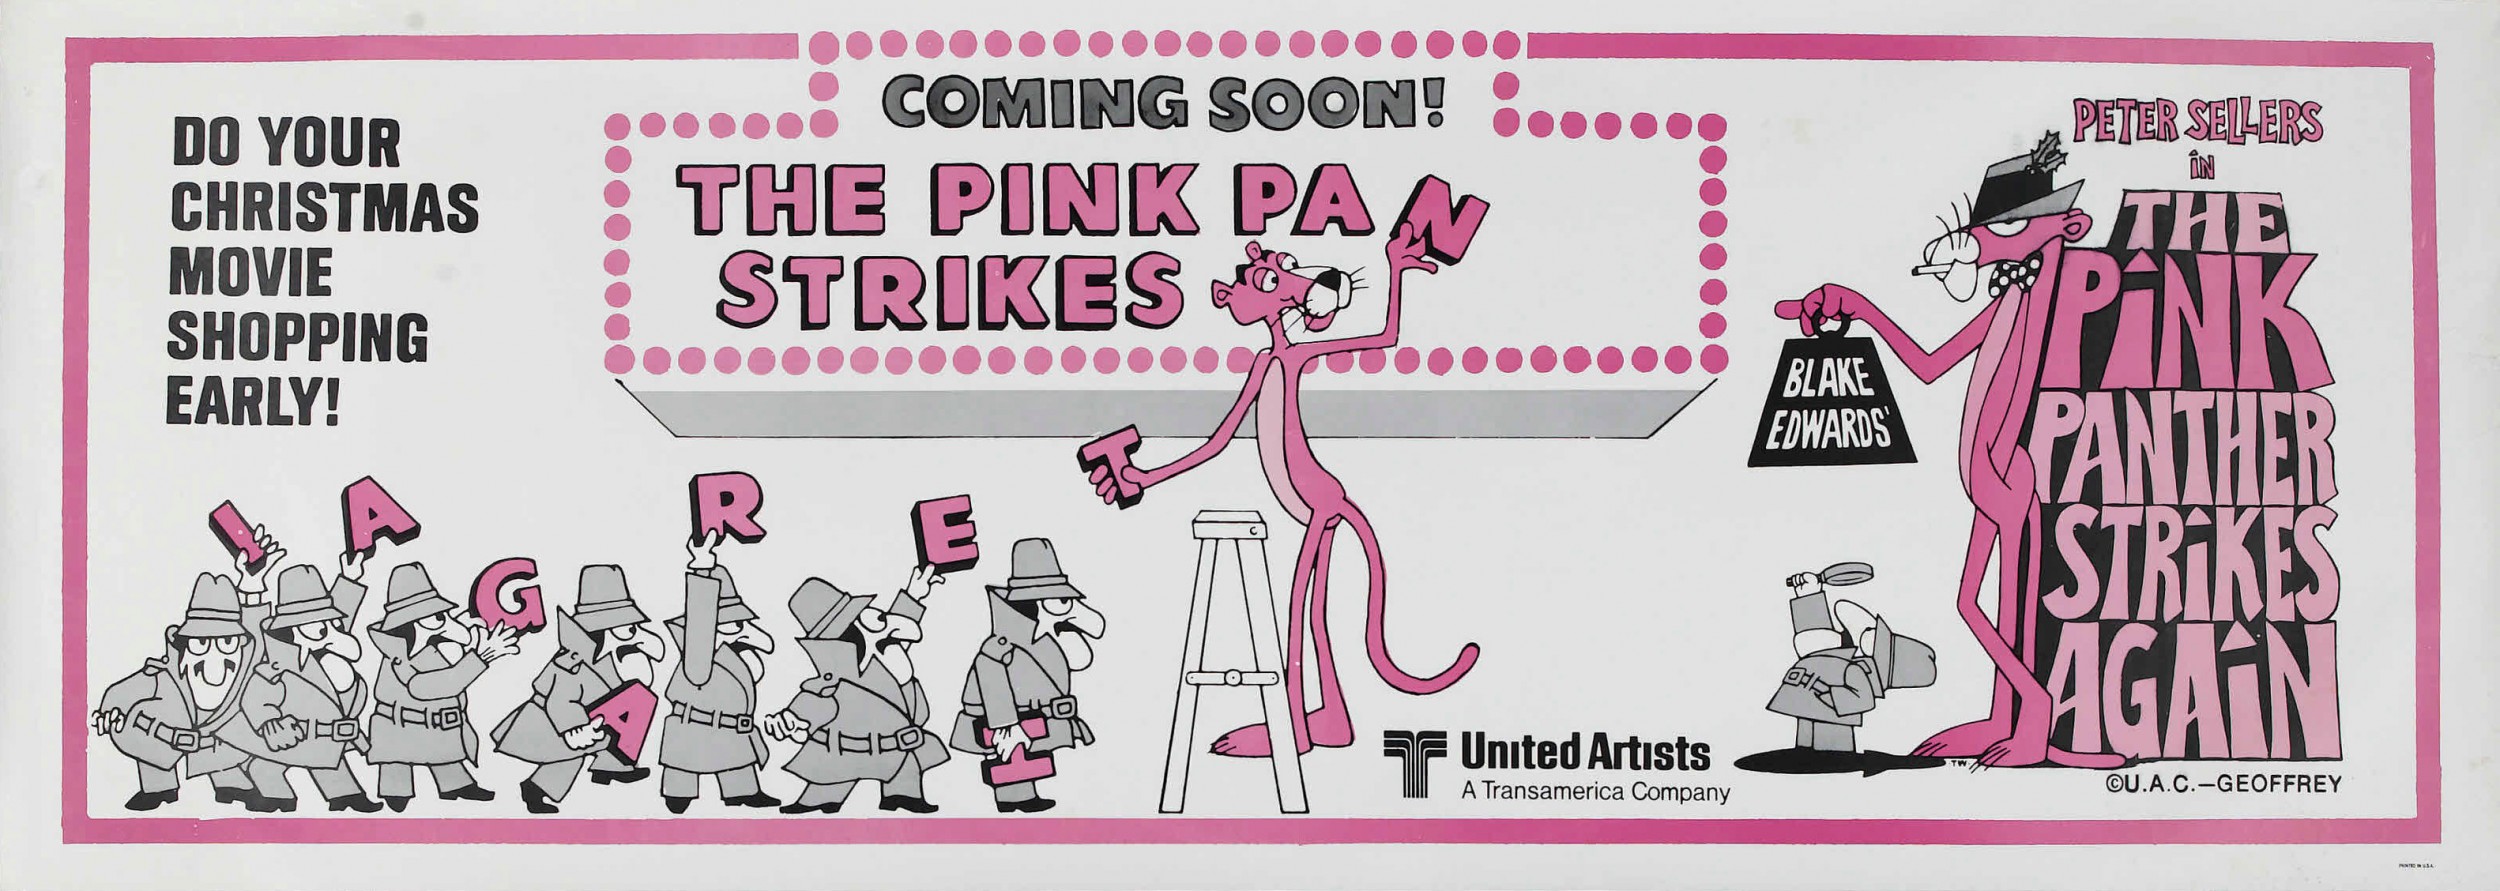 Mega Sized Movie Poster Image for The Pink Panther Strikes Again (#8 of 8)